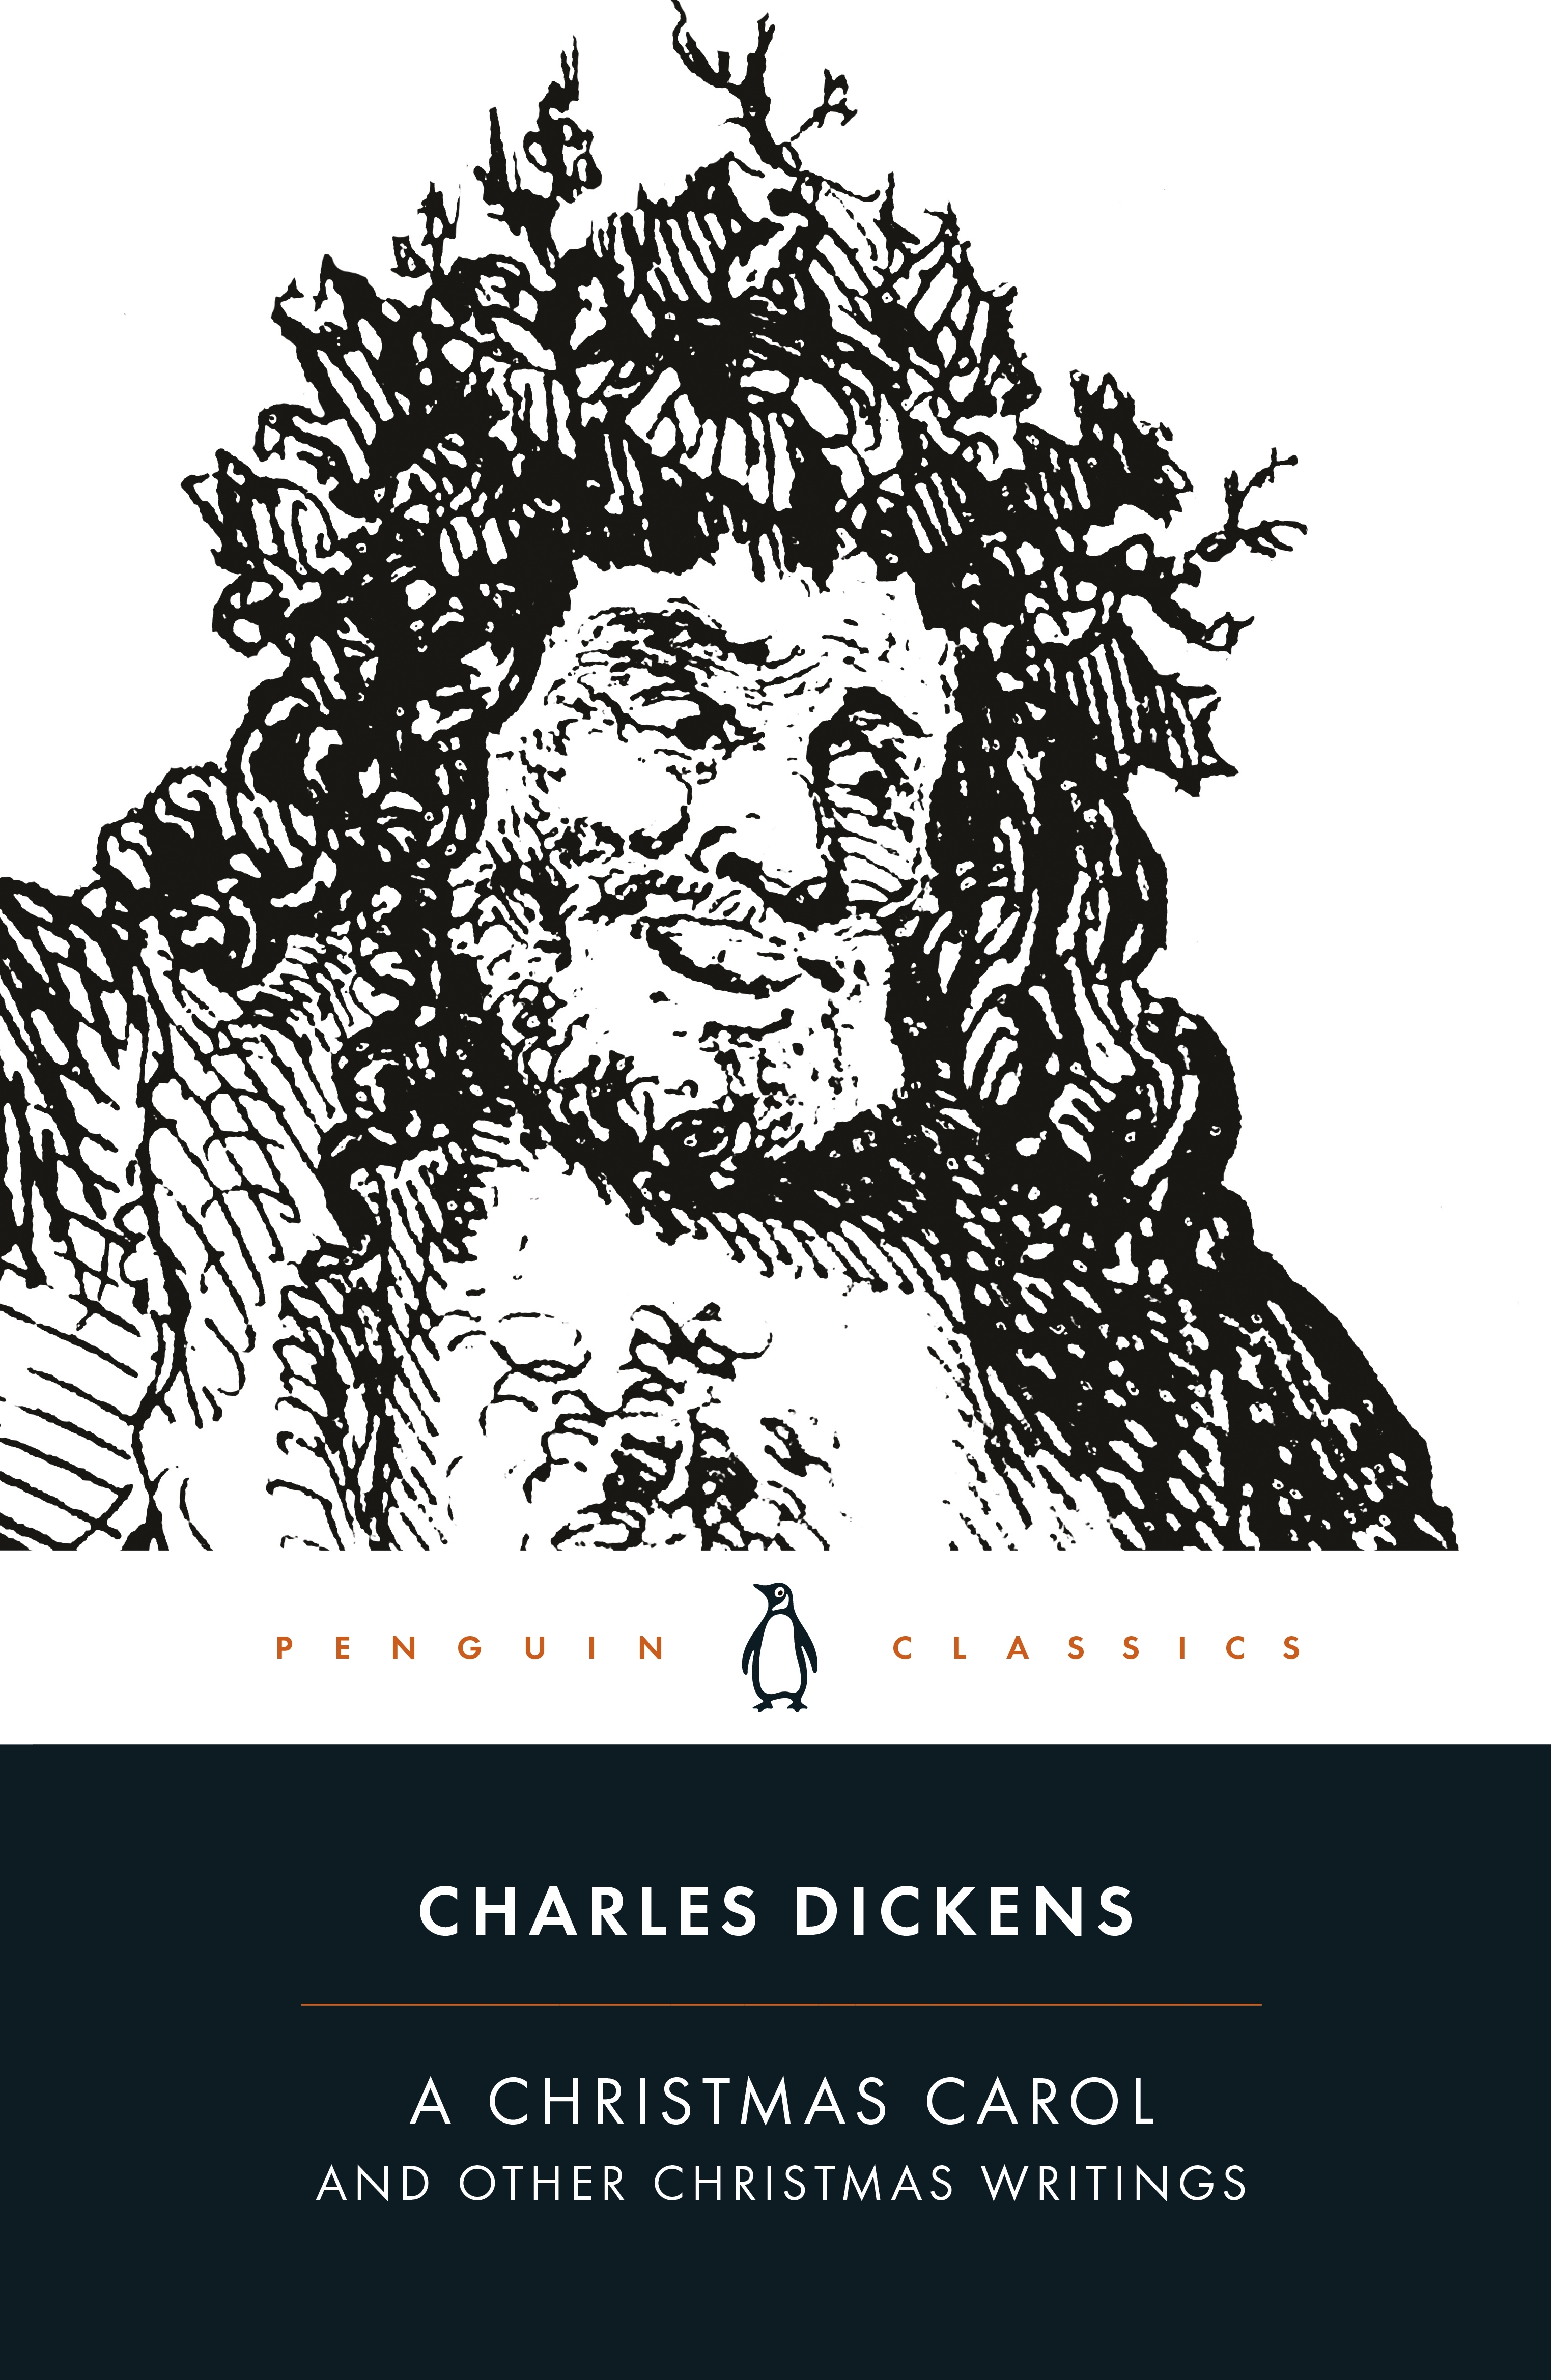 A Christmas Carol And Other Christmas Writings by Charles Dickens - Penguin Books Australia